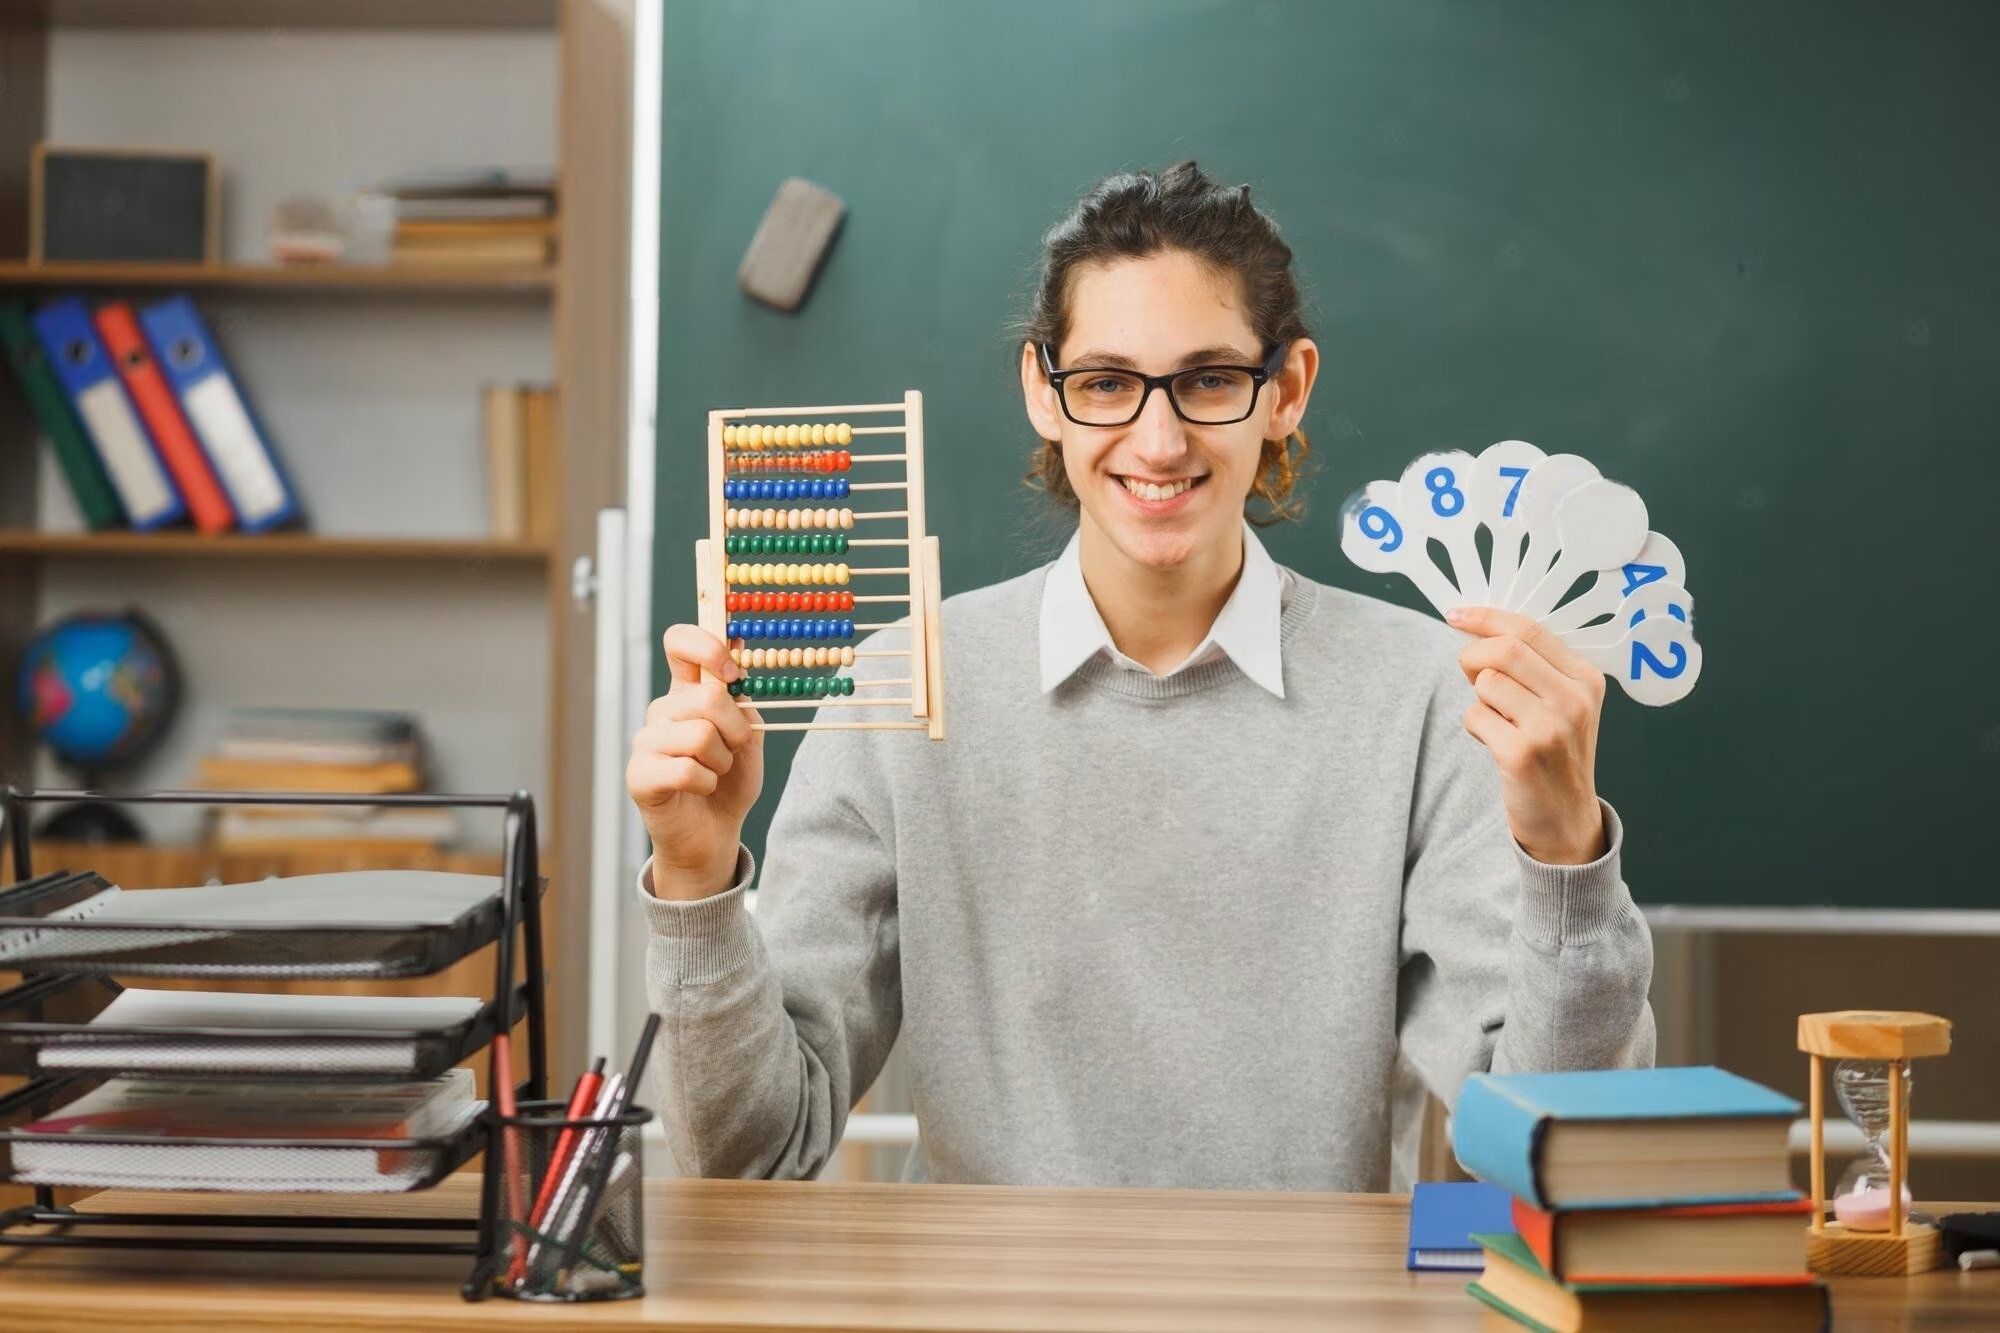 smiling-young-male-teacher-wearing-glasses-holding-abacus-with-number-fun-sitting-desk-with-school-tools-classroom_141793-136522-ifoztzxgg-transformed.jpeg